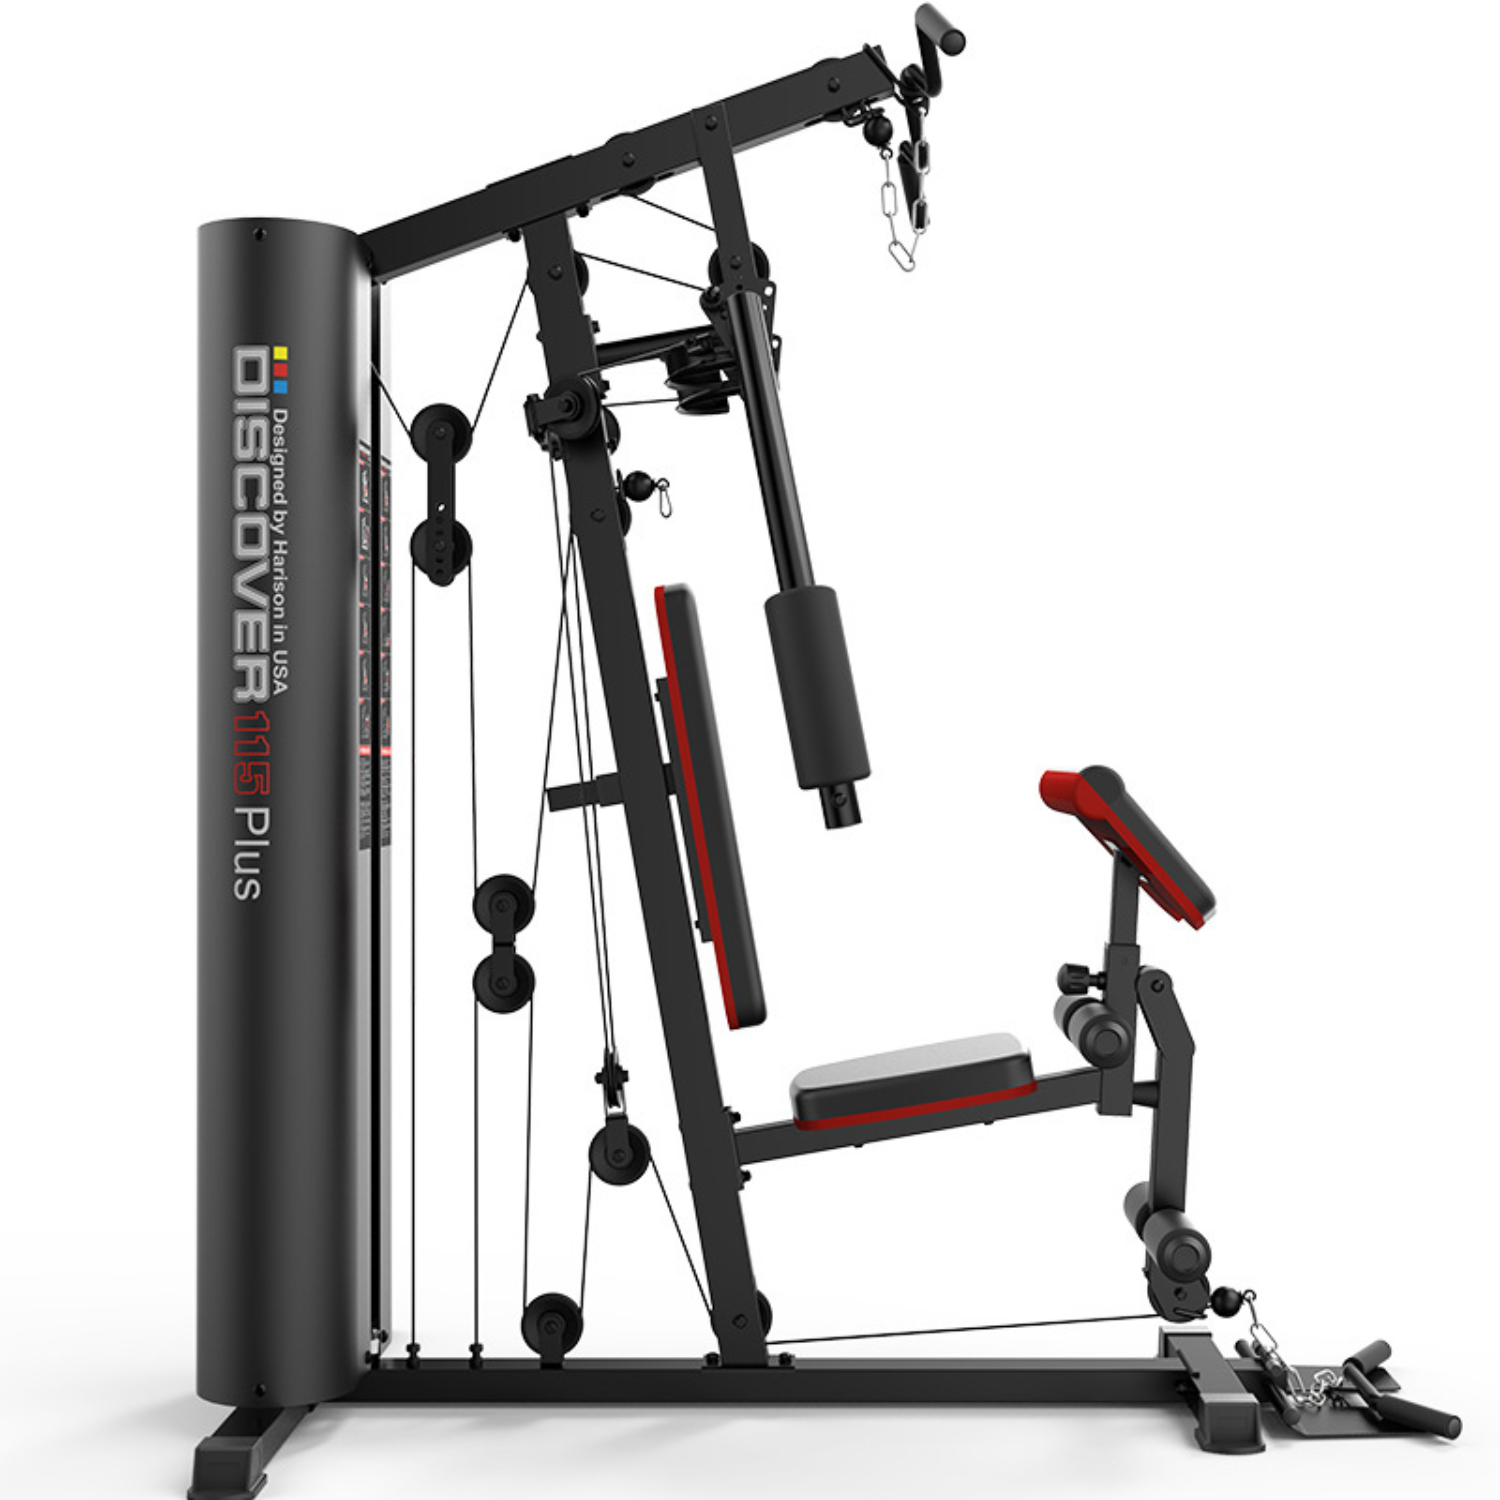 HARISON DISCOVER 115PLUS Multifunction Fitness Station Workout Equipment-Gym Direct